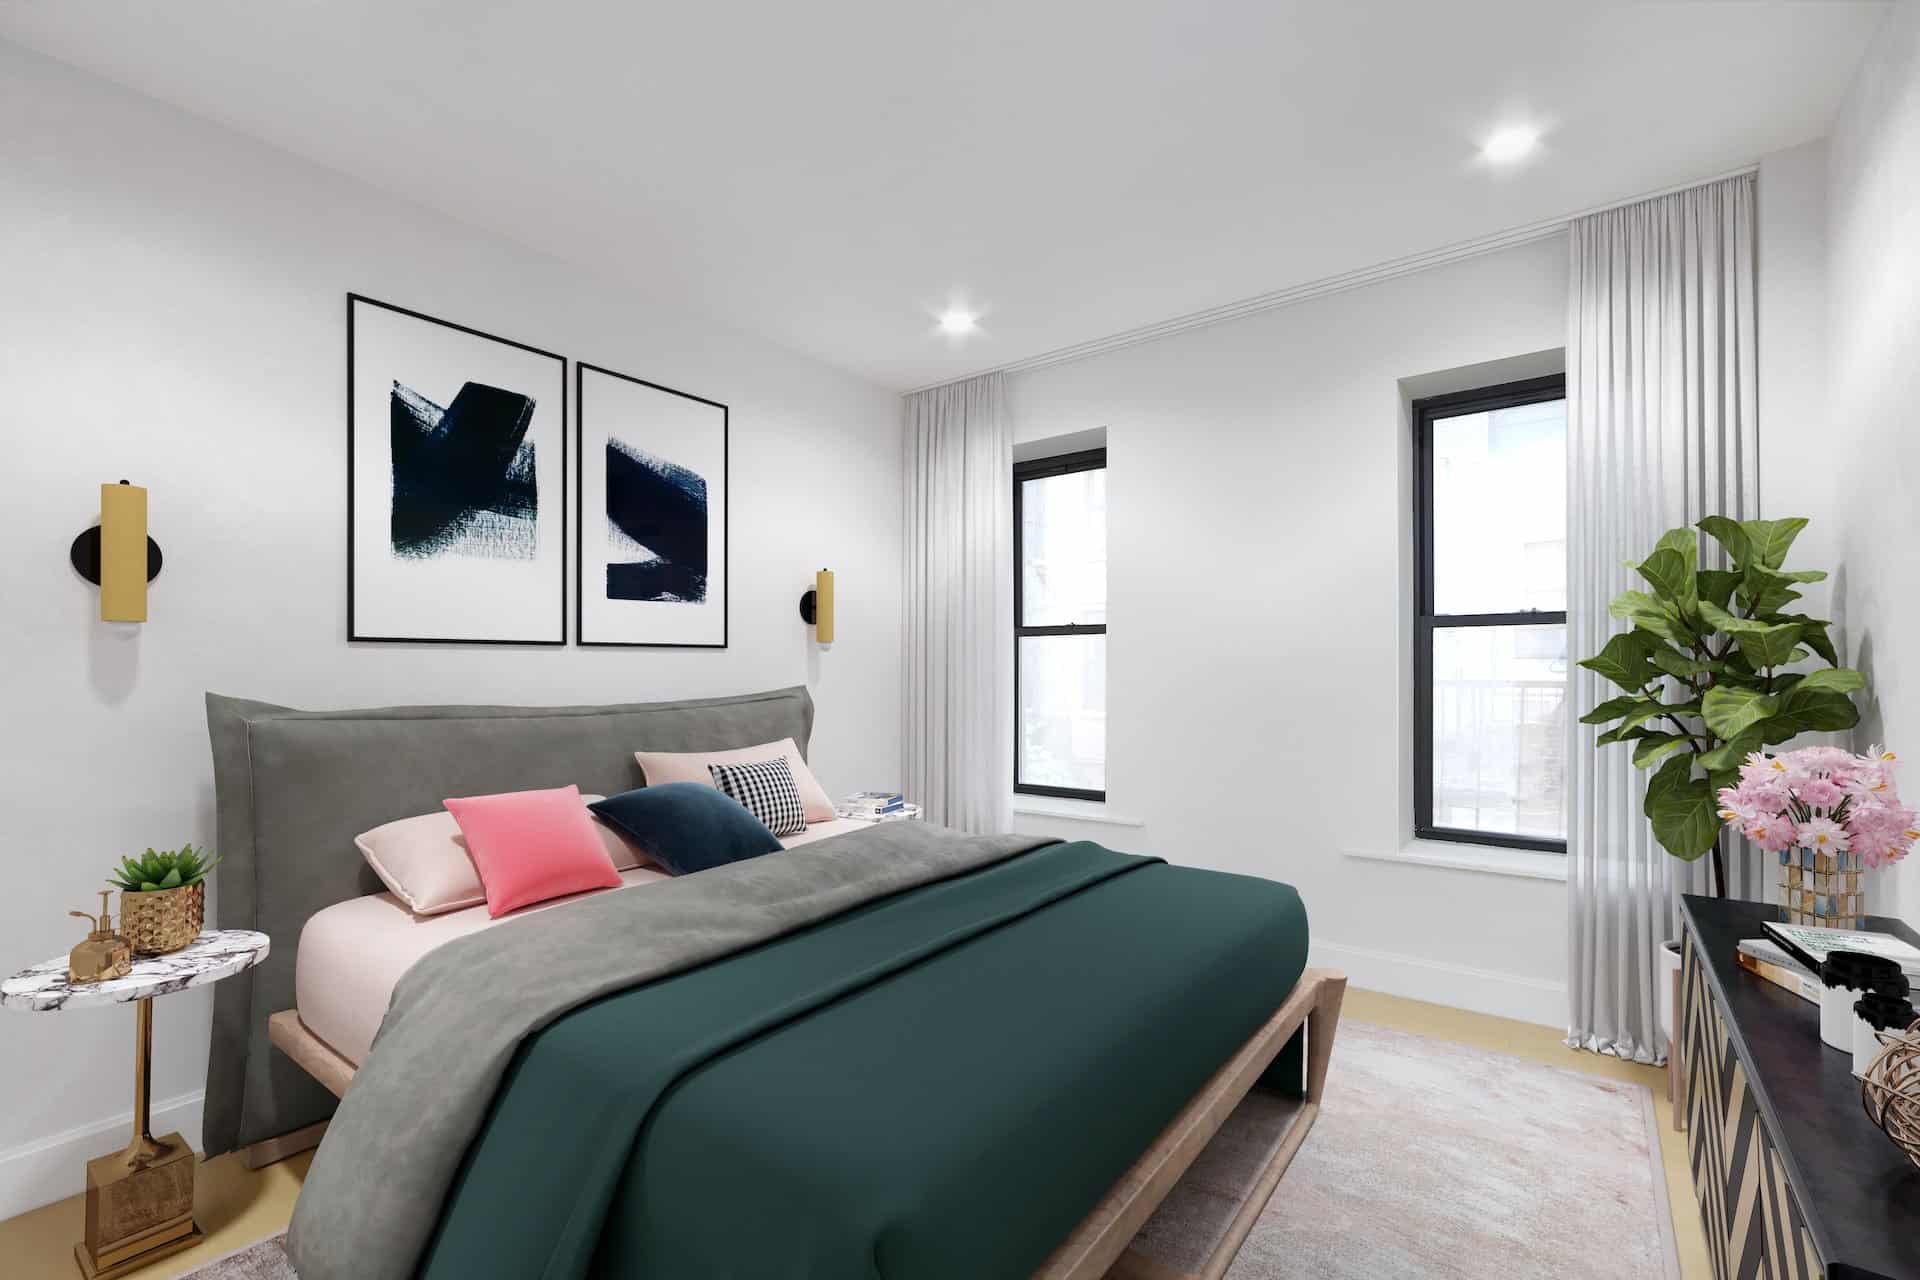 Bedroom at 236 West 10th Street apartments with a king bed, matching side tables, two windows and hardwood floors.